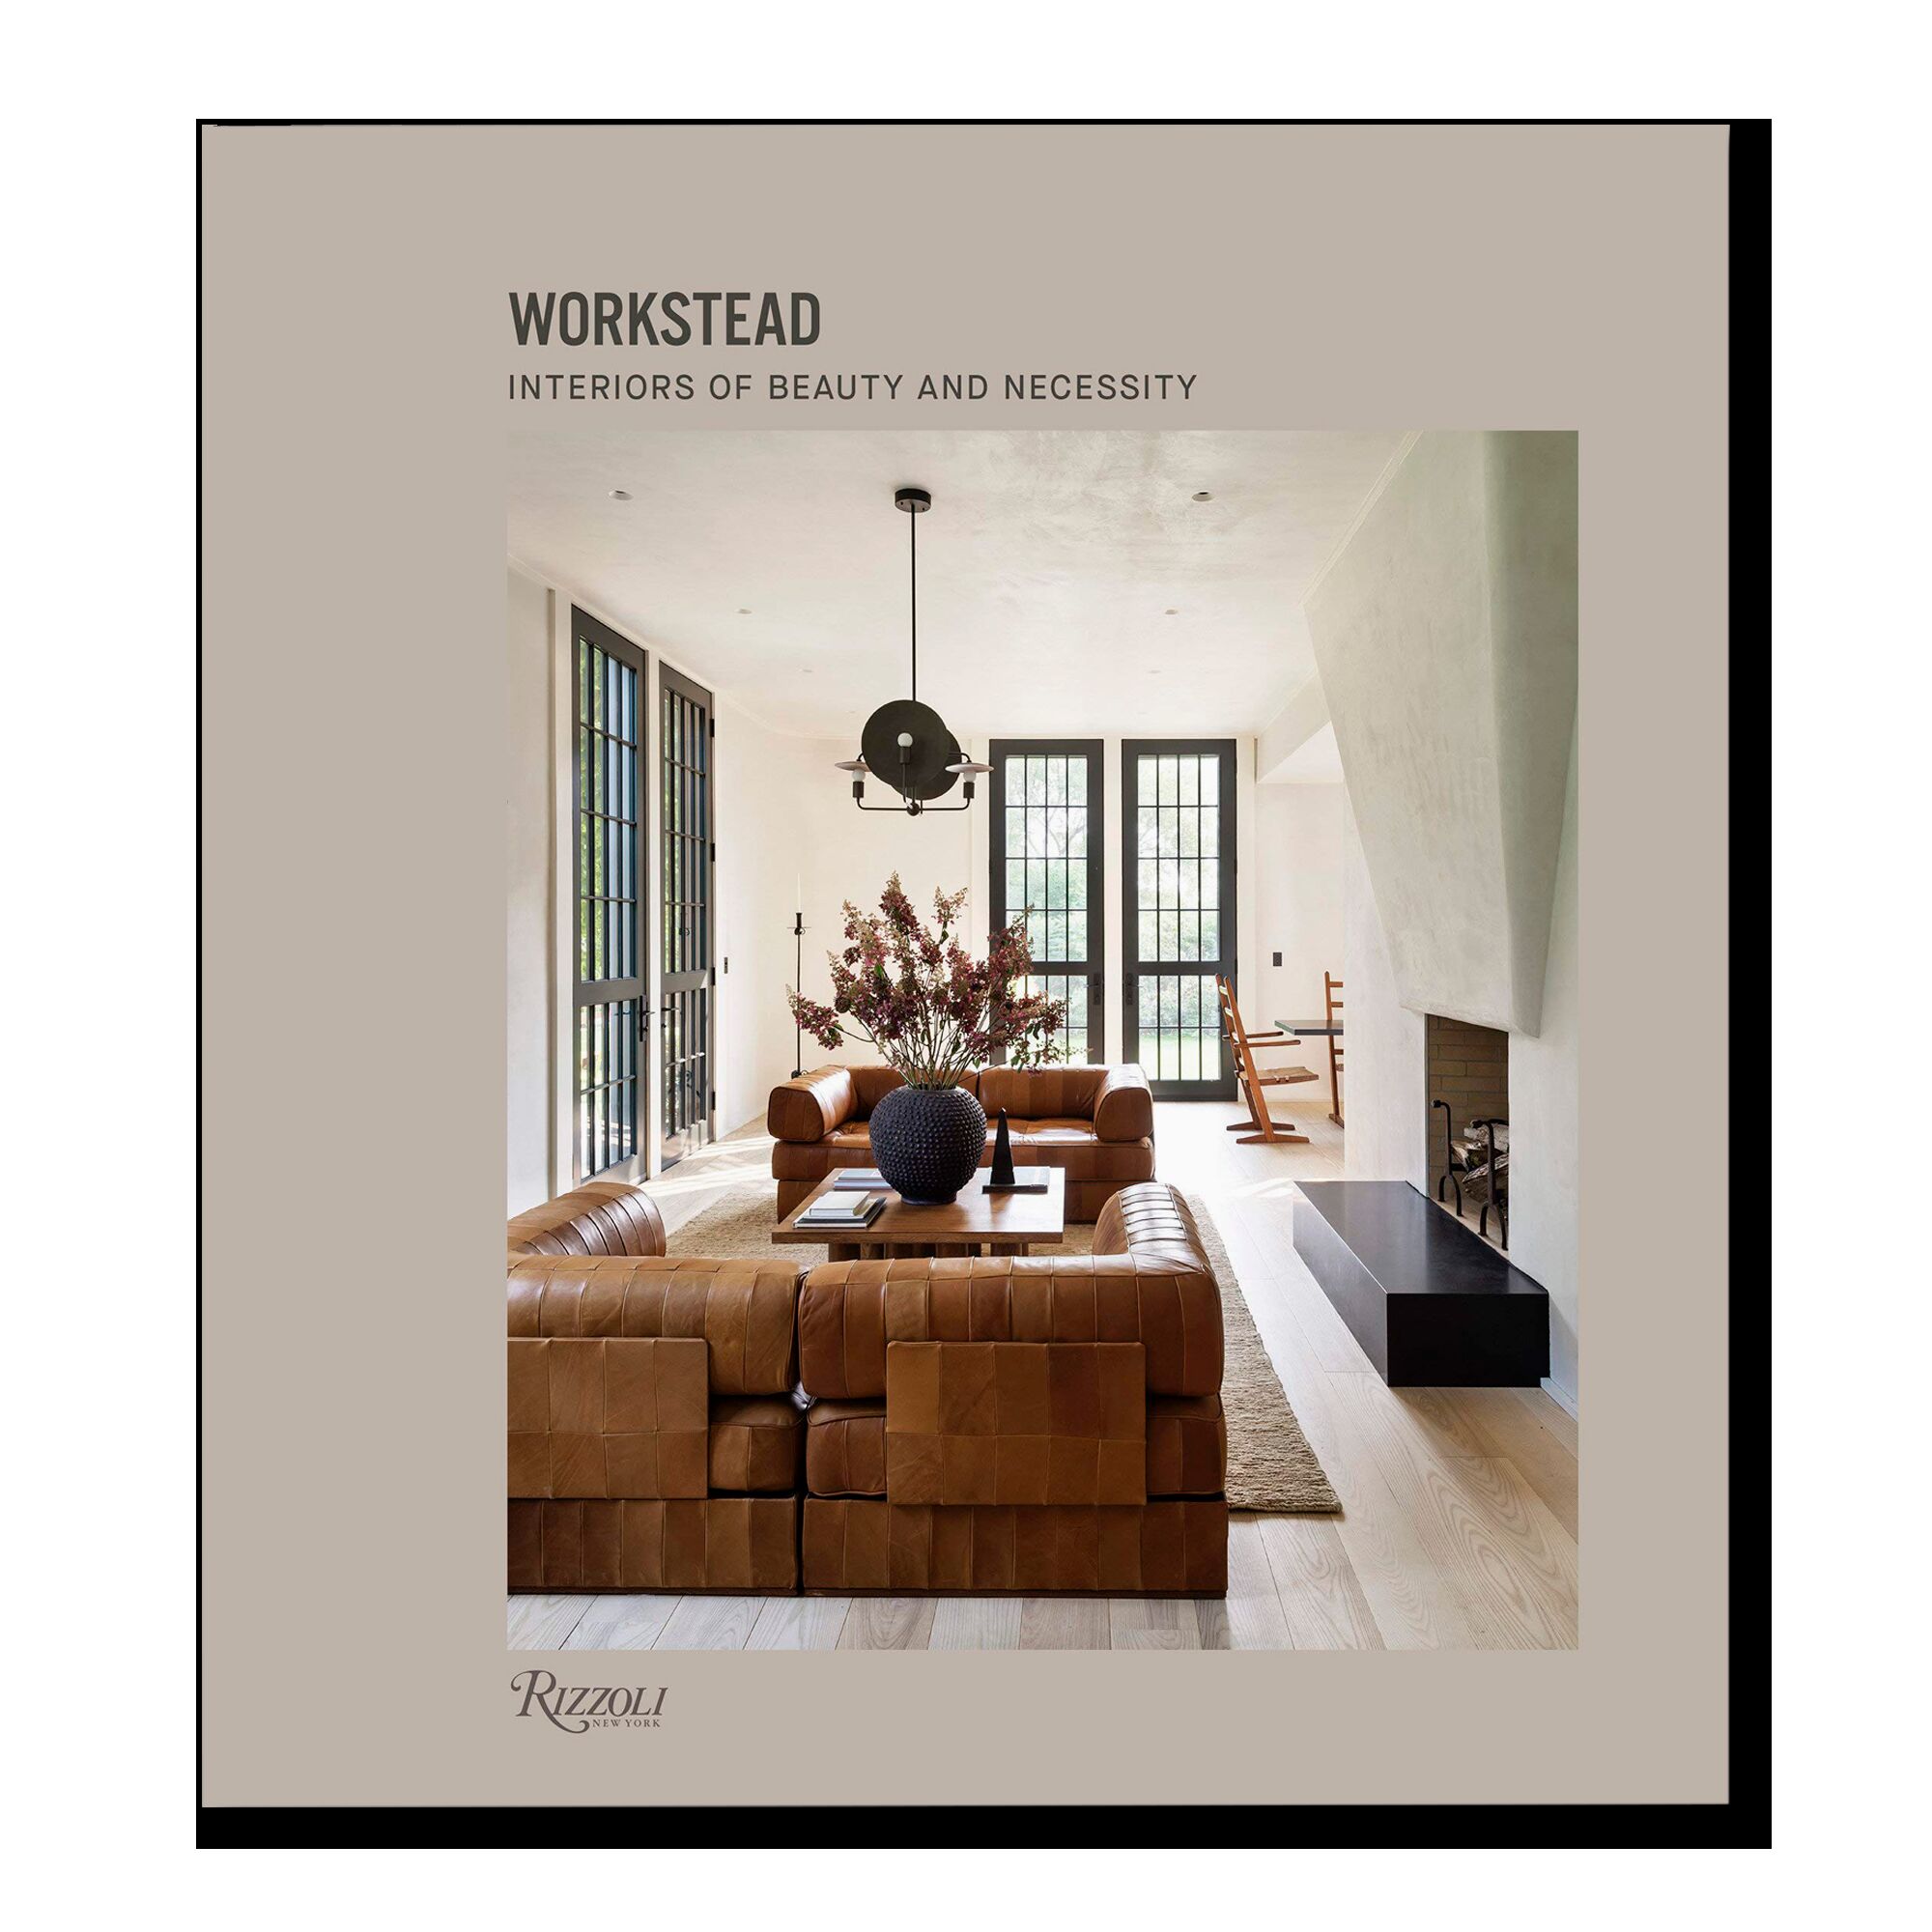 Workstead: Interiors of Beauty and Necessity